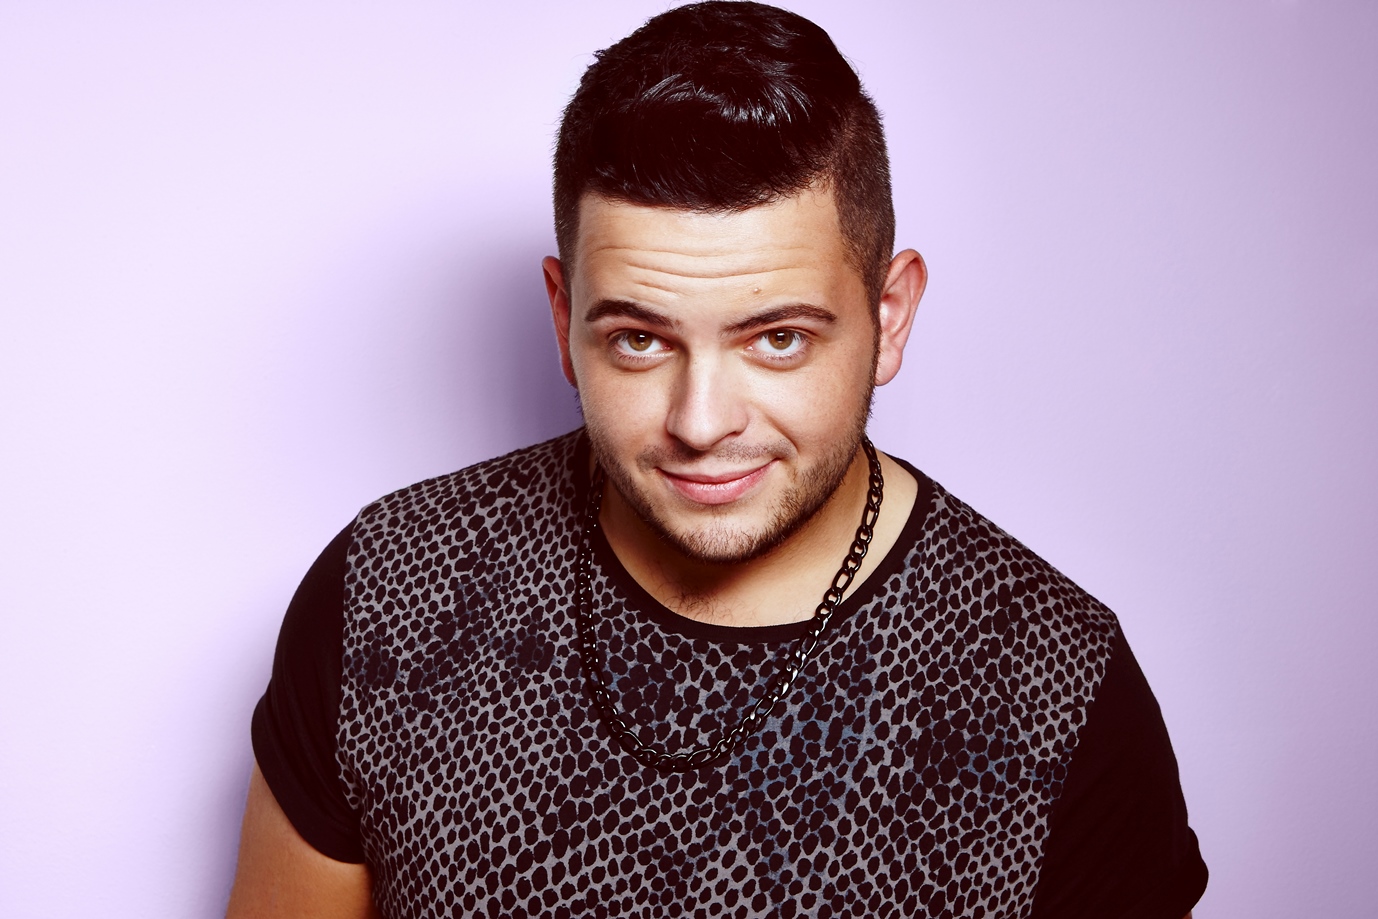 Paul Akister announced for X Factor in Manchester